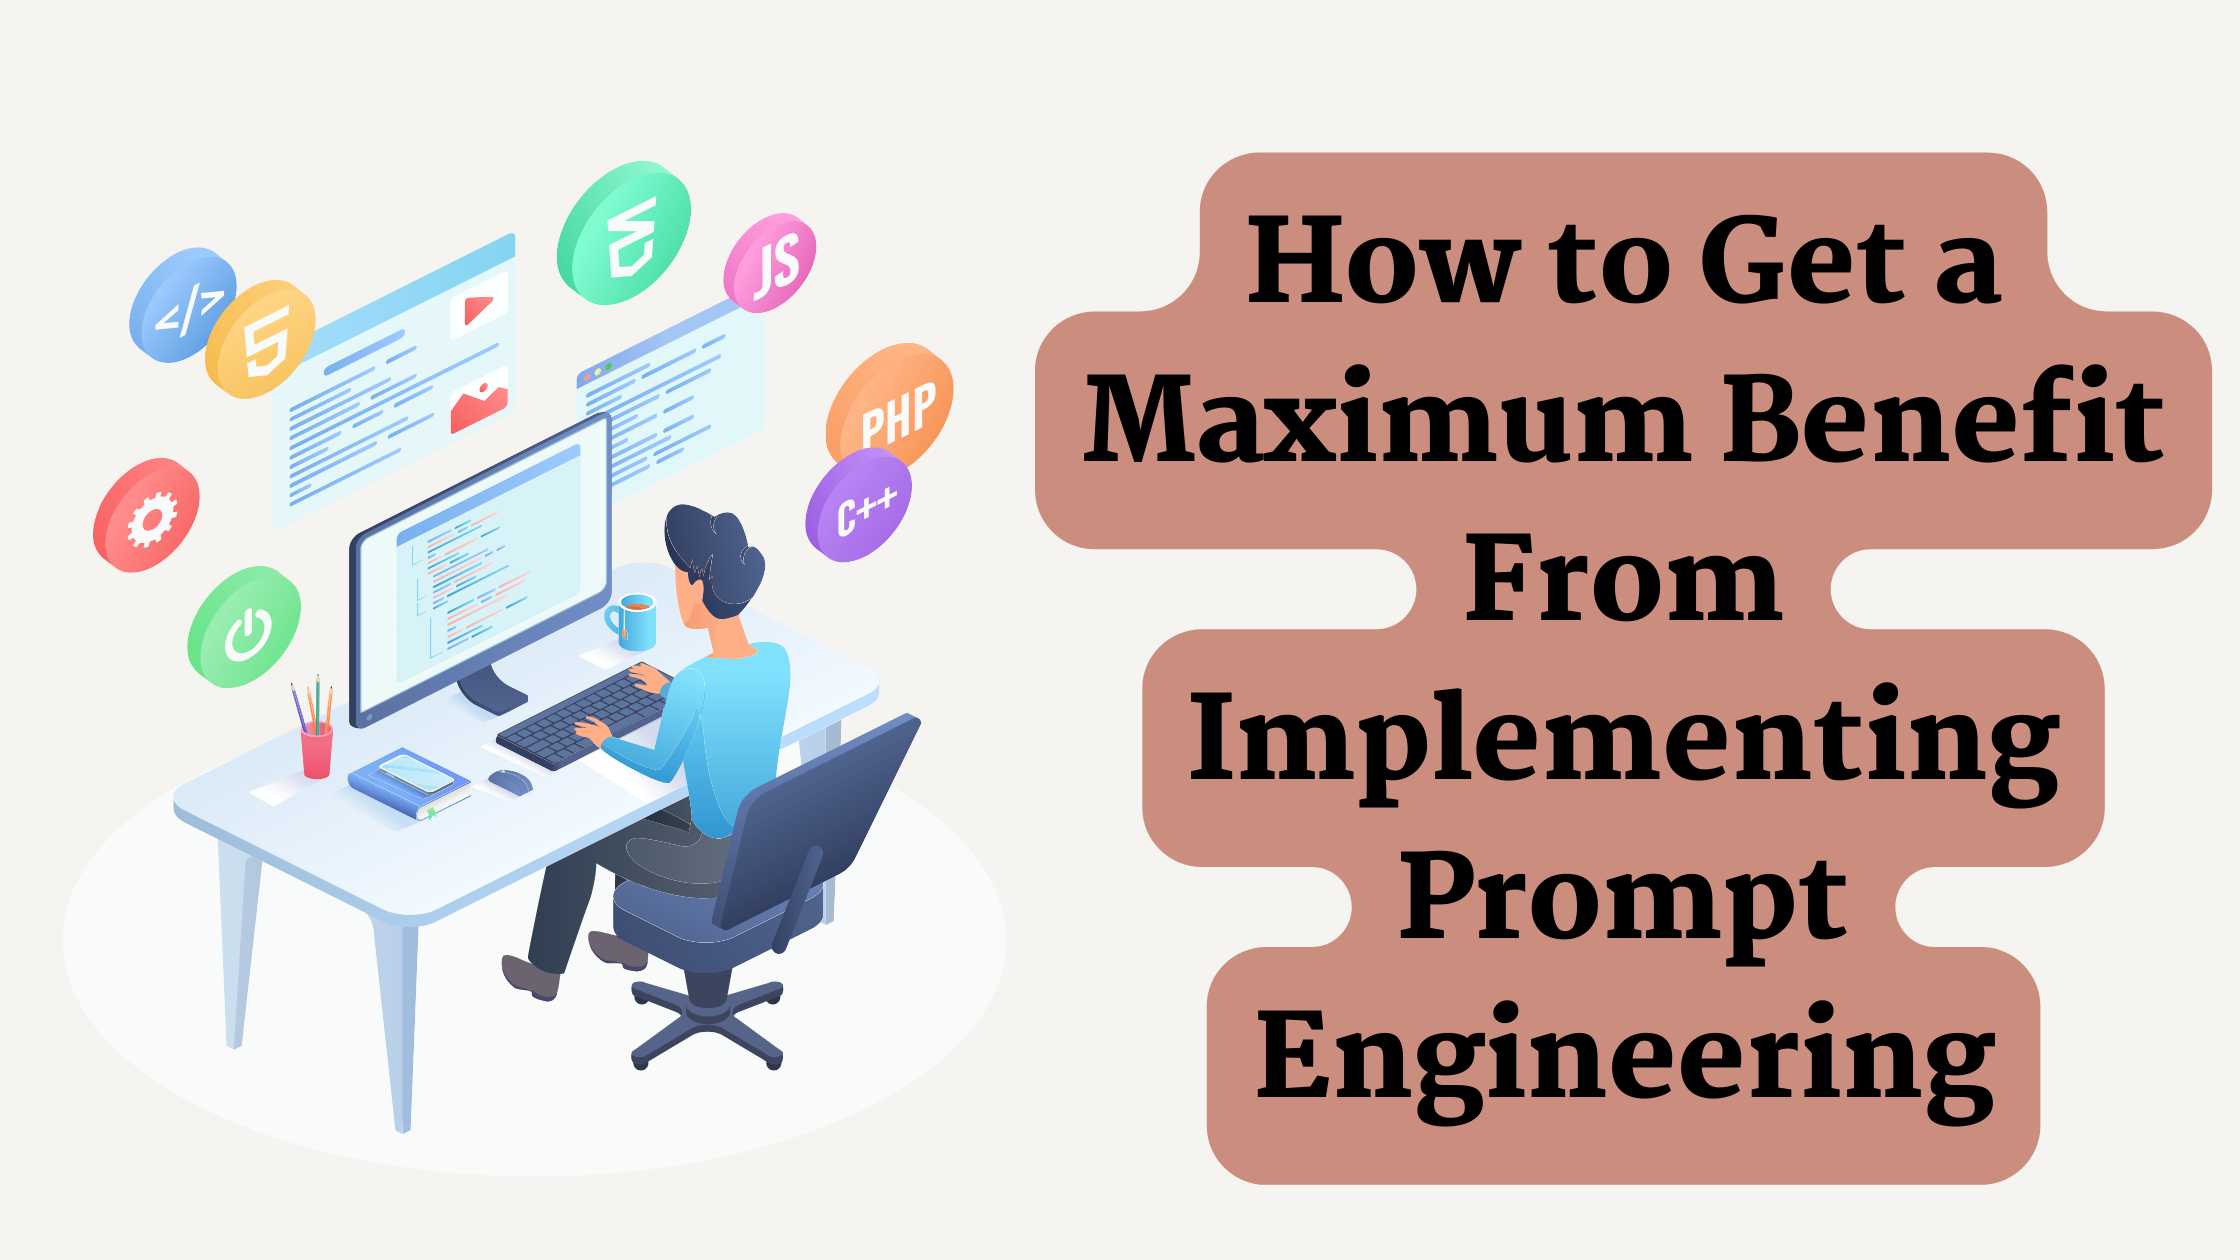 How to Get a Maximum Benefit From Implementing Prompt Engineering